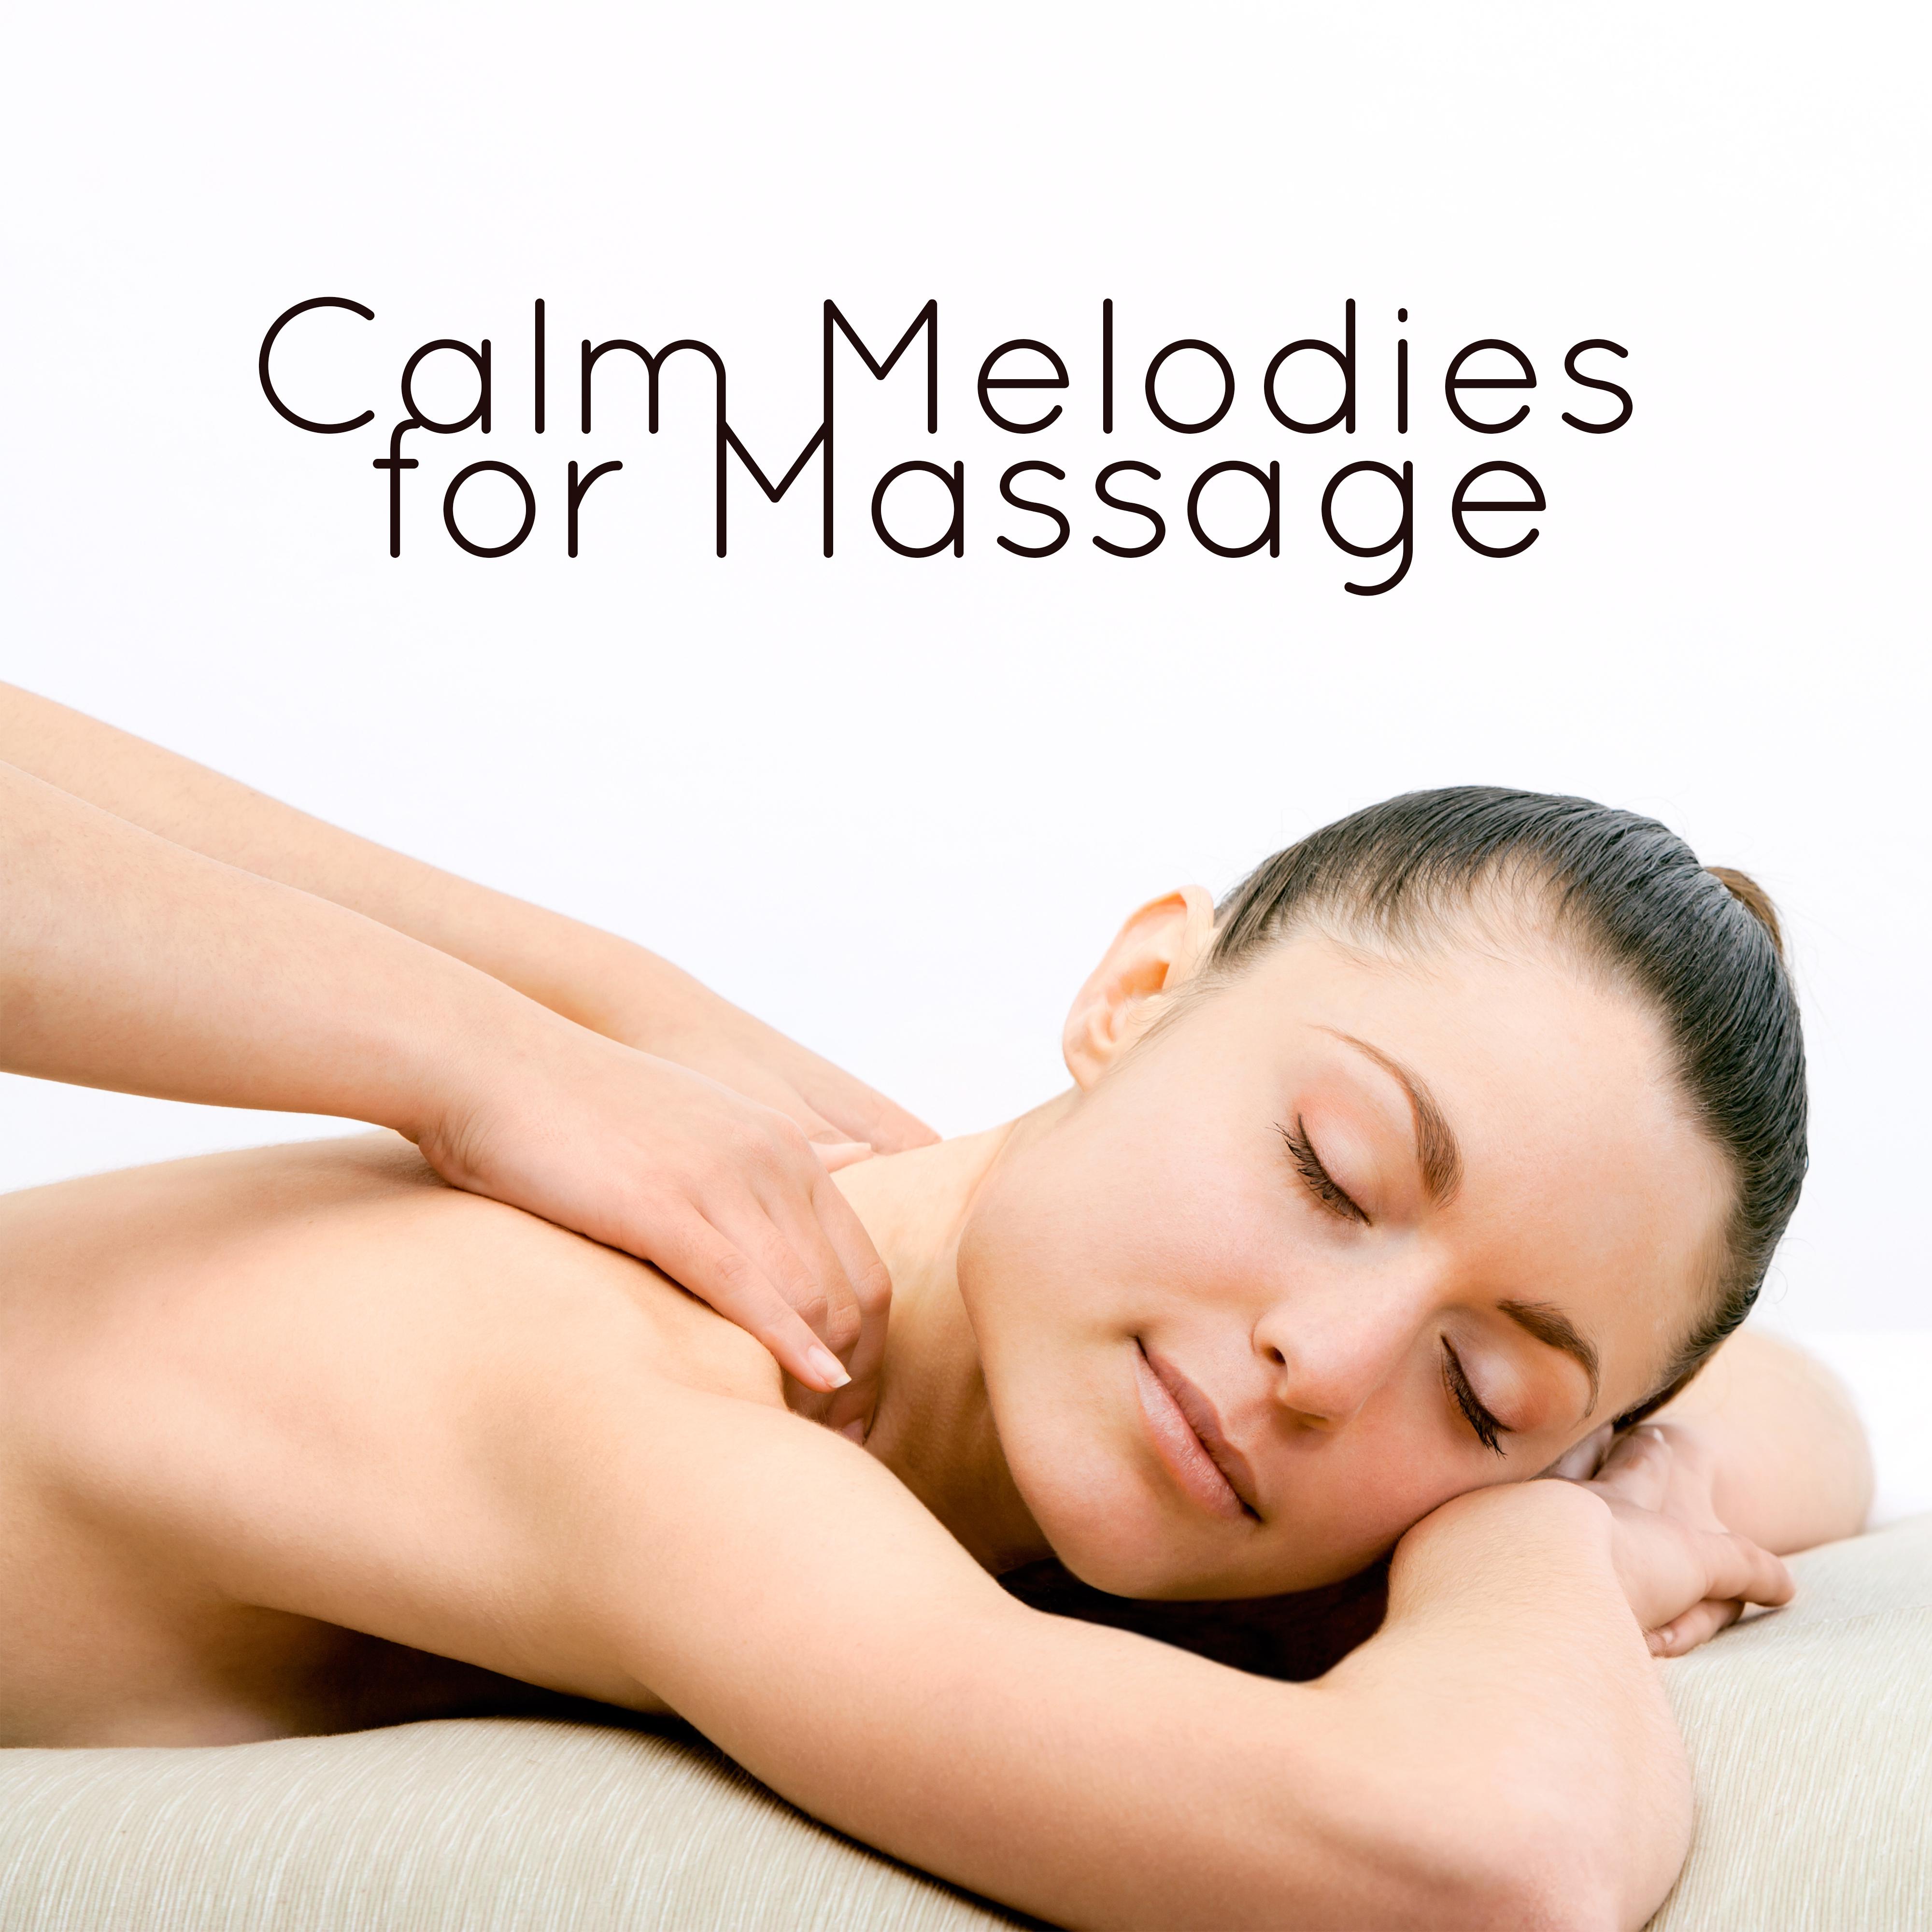 Calm Melodies for Massage